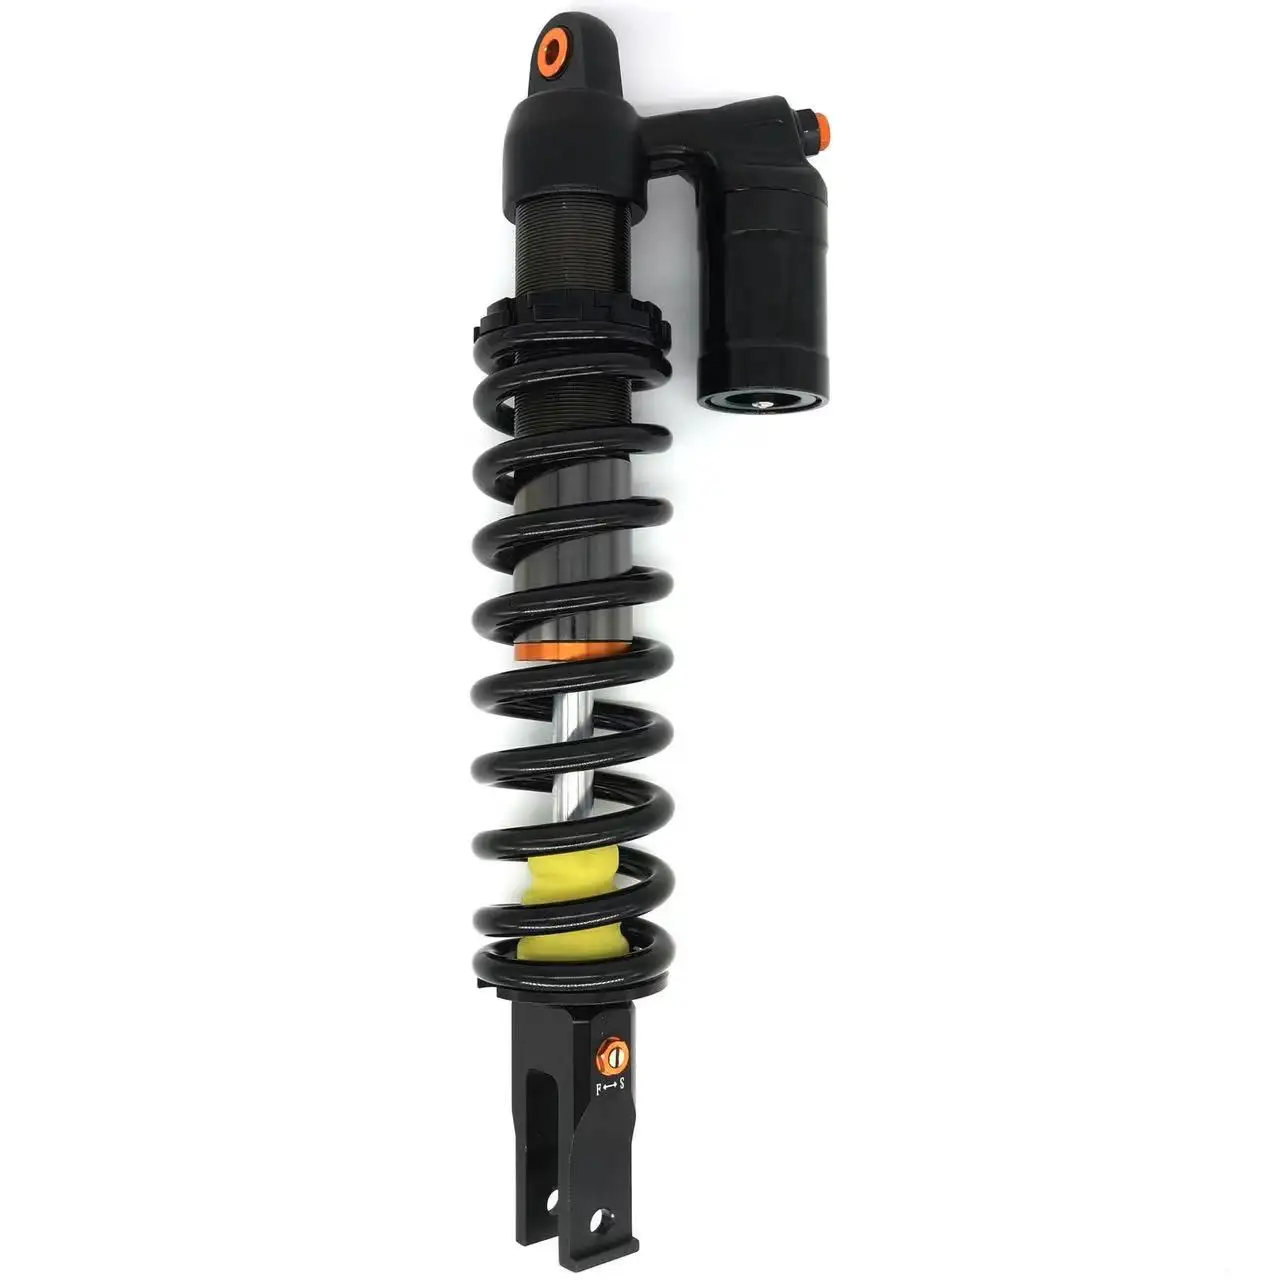 Shangxia 400-480mm Suspension Shock ATV Double Adjustable Rear Shock Absorbers Motorcycle